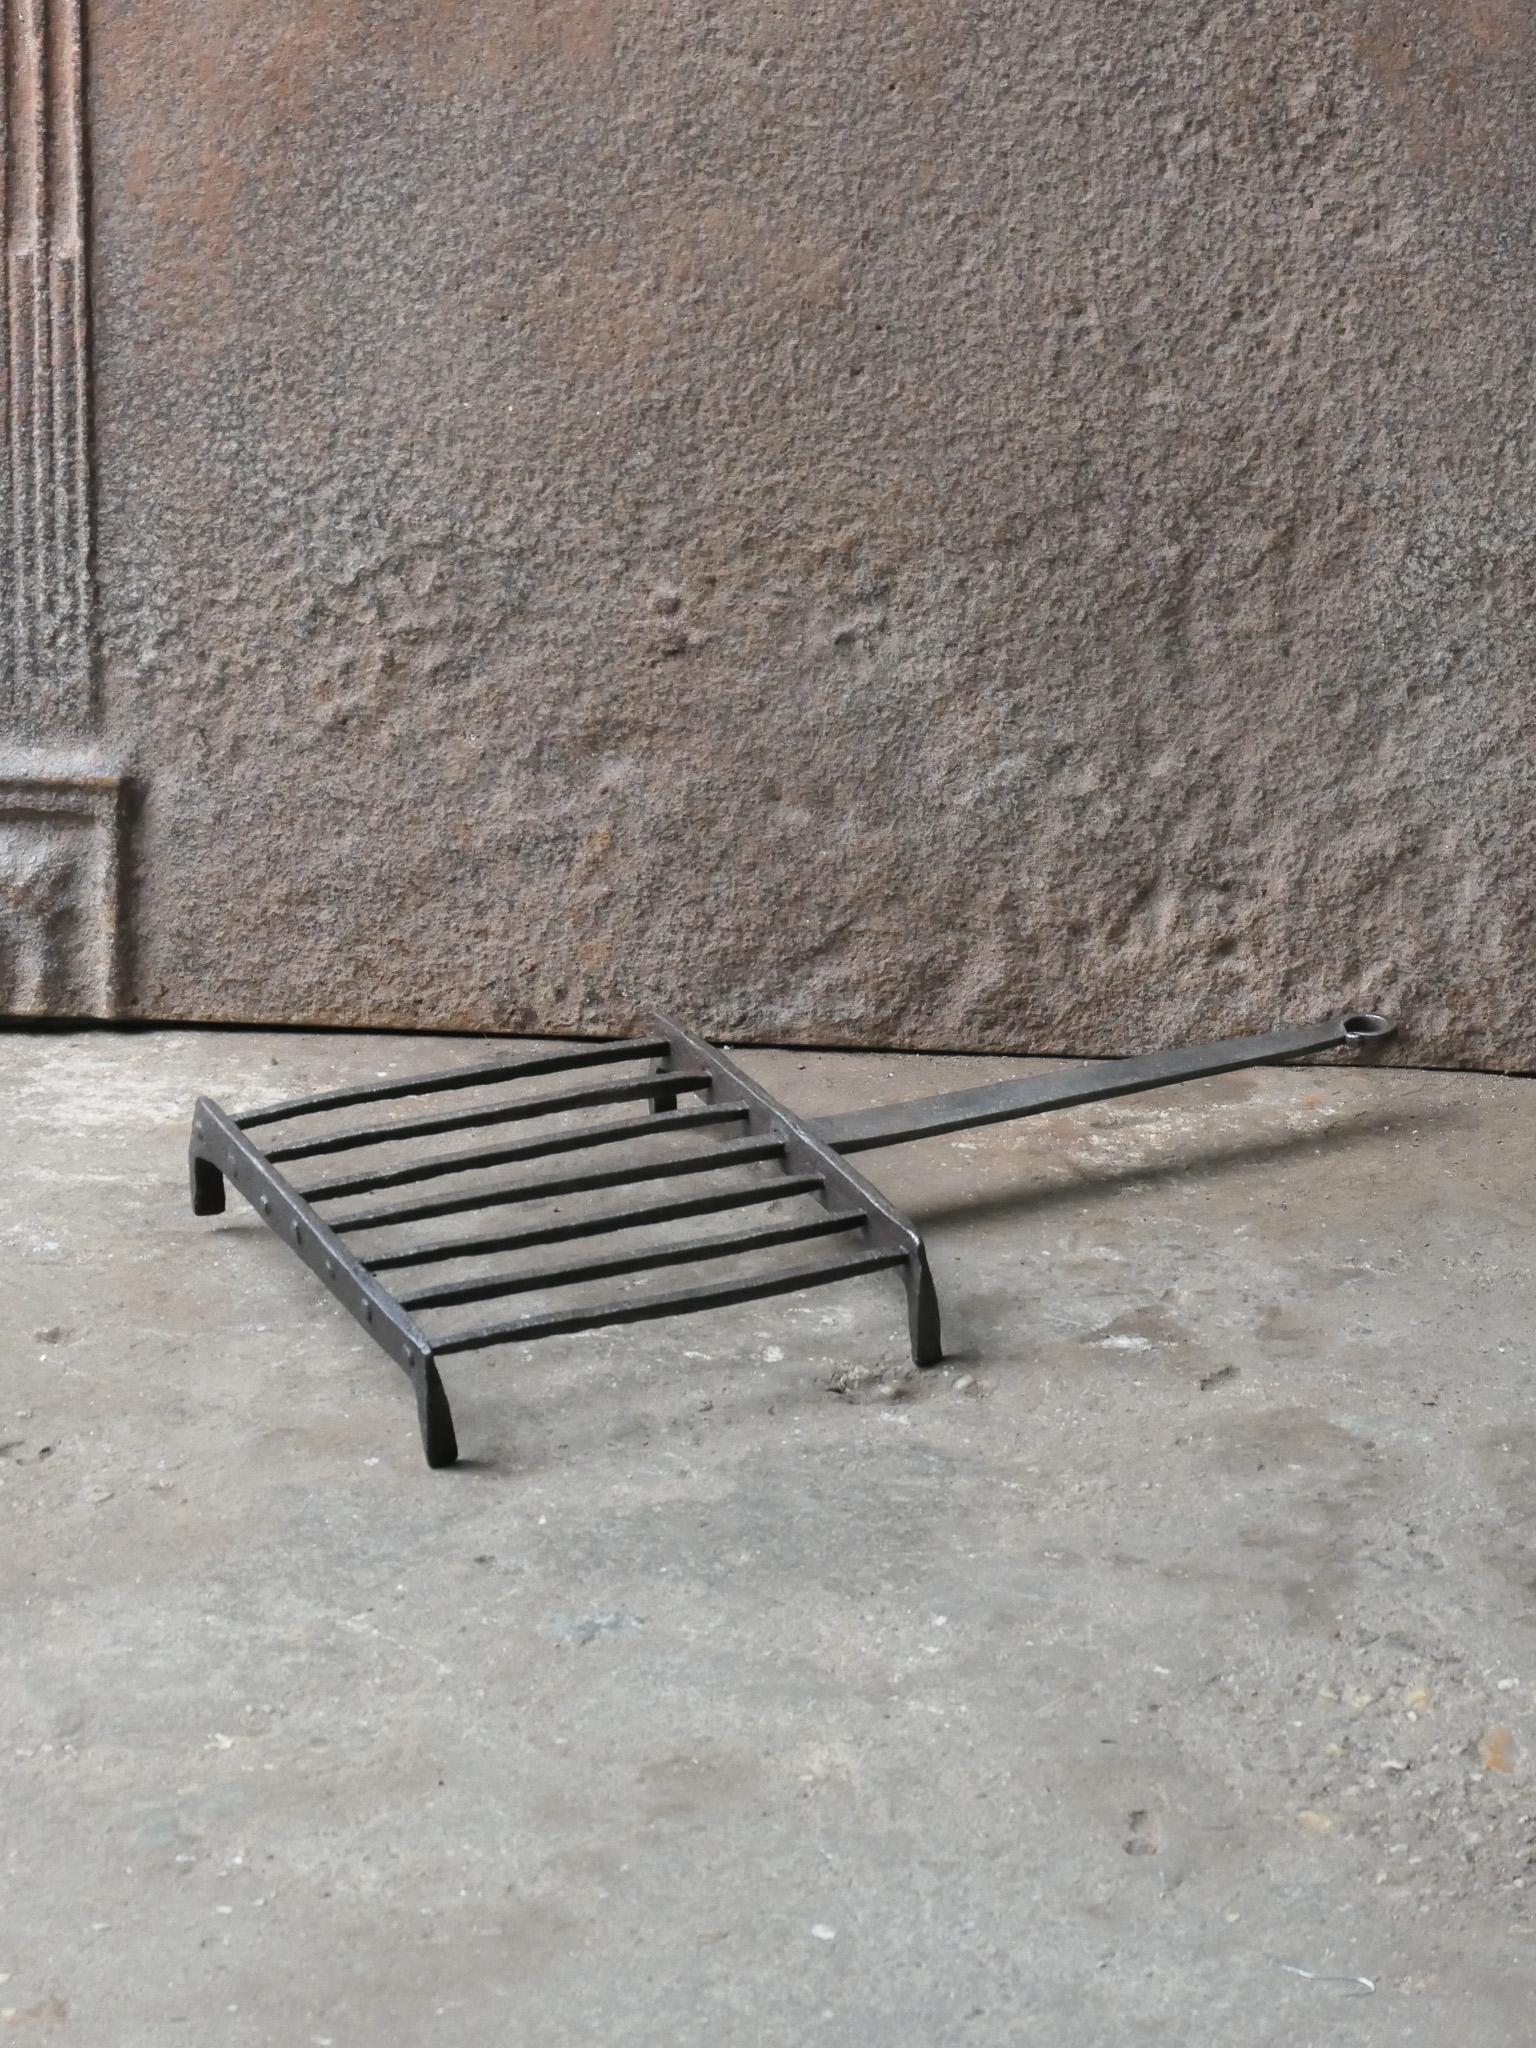 17th century hand forged French gridiron, made of wrought iron. It is used to grill small pieces of meat quickly over the fire. Sometimes they are put in the fire or else on a trivet, depending on the size of the fire. The gridiron is in a good